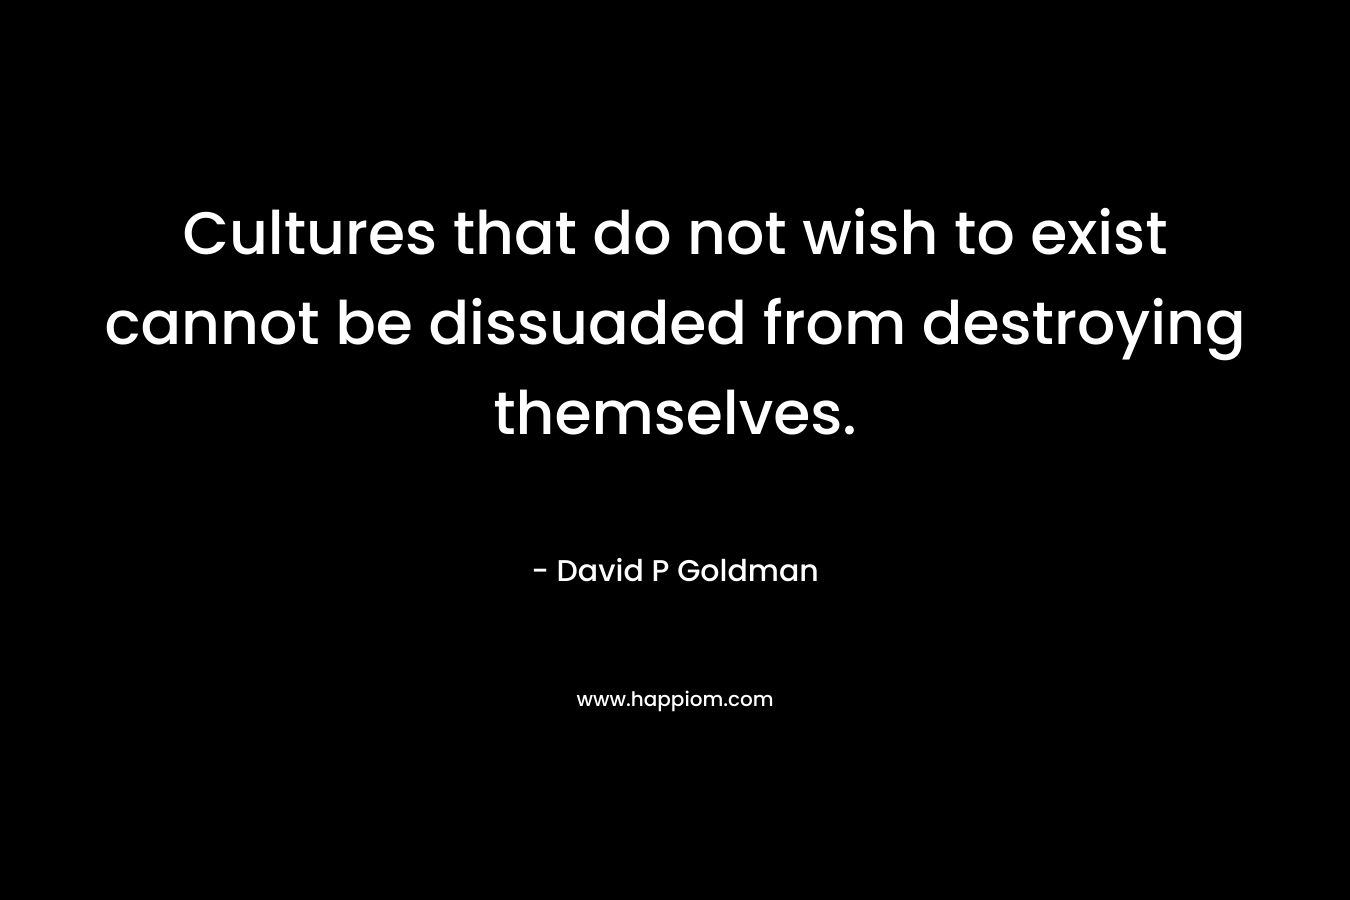 Cultures that do not wish to exist cannot be dissuaded from destroying themselves. – David P Goldman